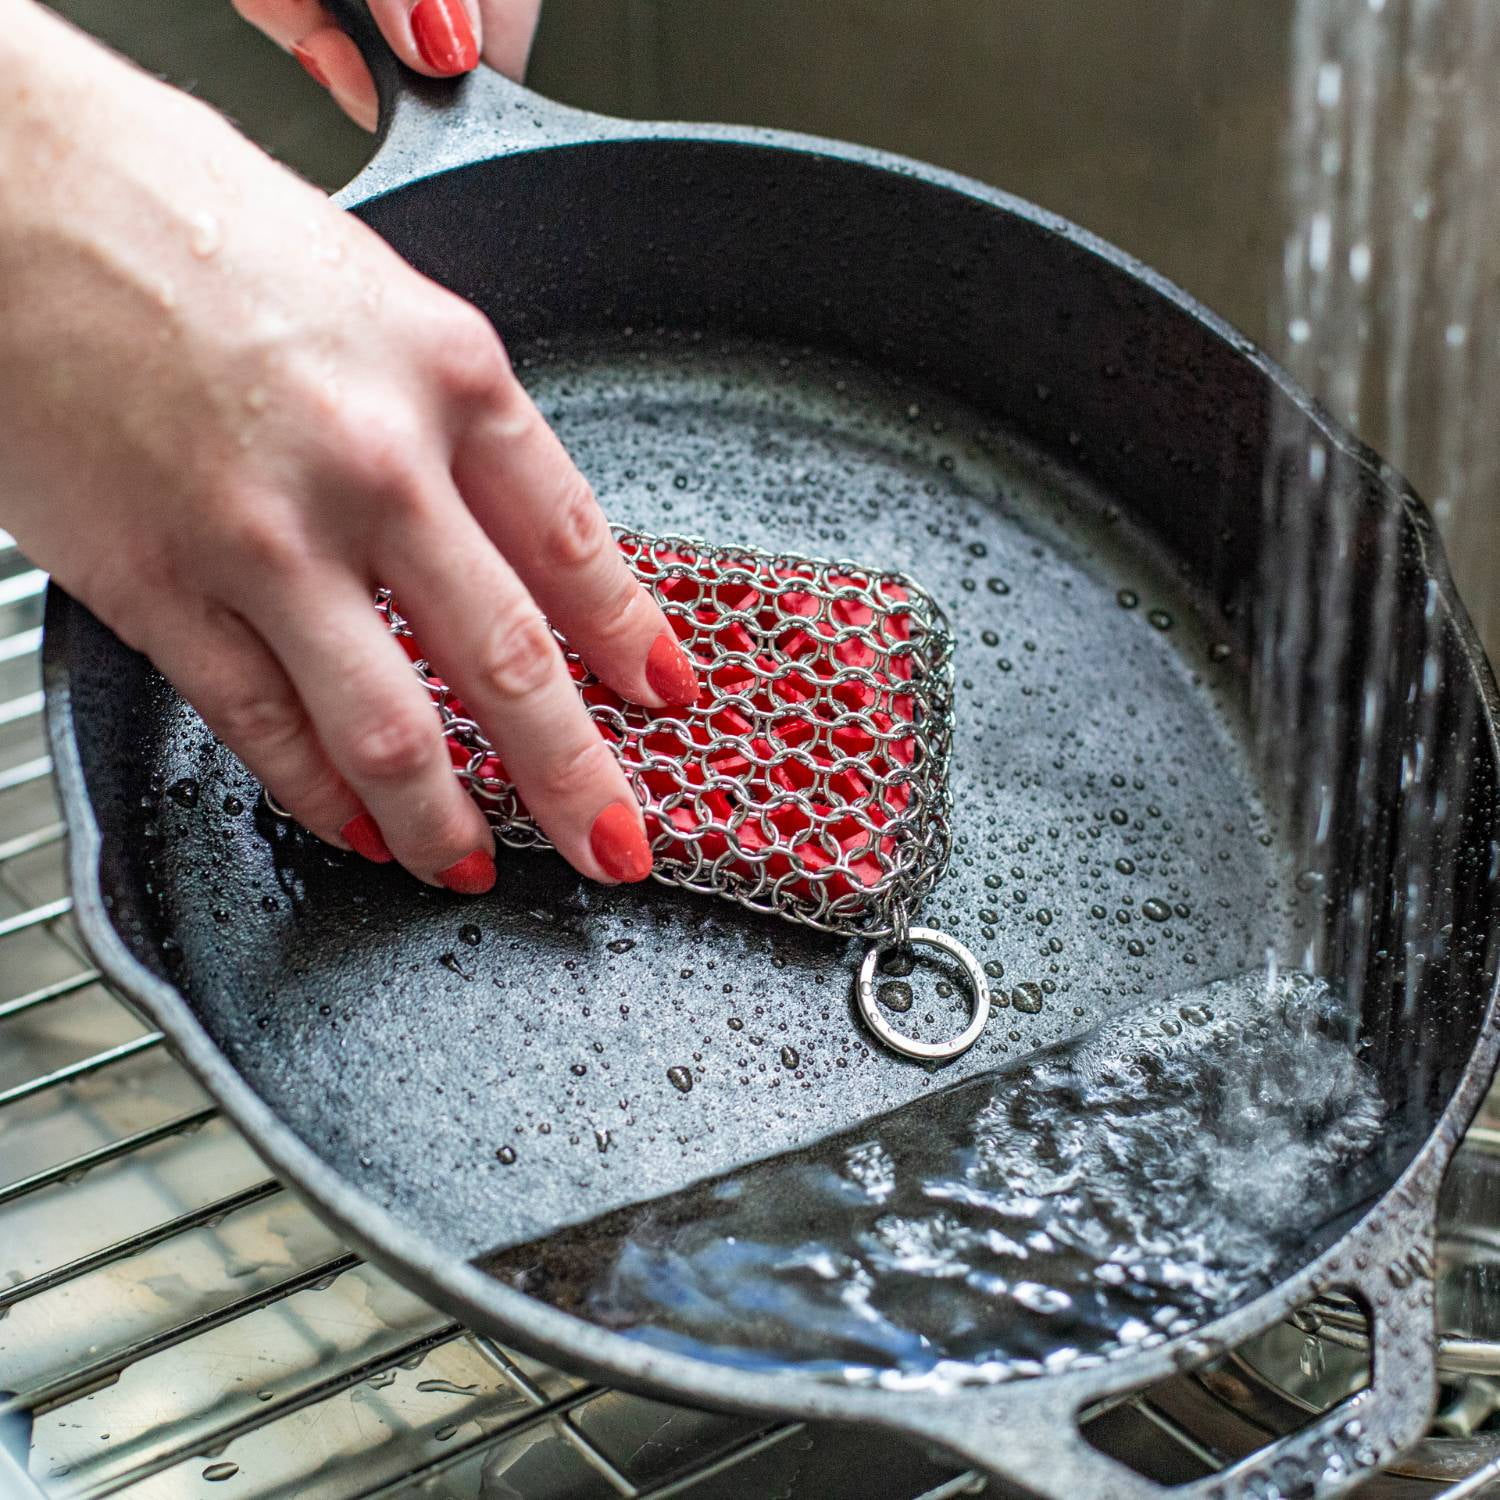 Lodge's Bestselling Scrubbing Pad Pulls 'Crusty Gunk' Off Cast Iron in  'Less Than a Minute